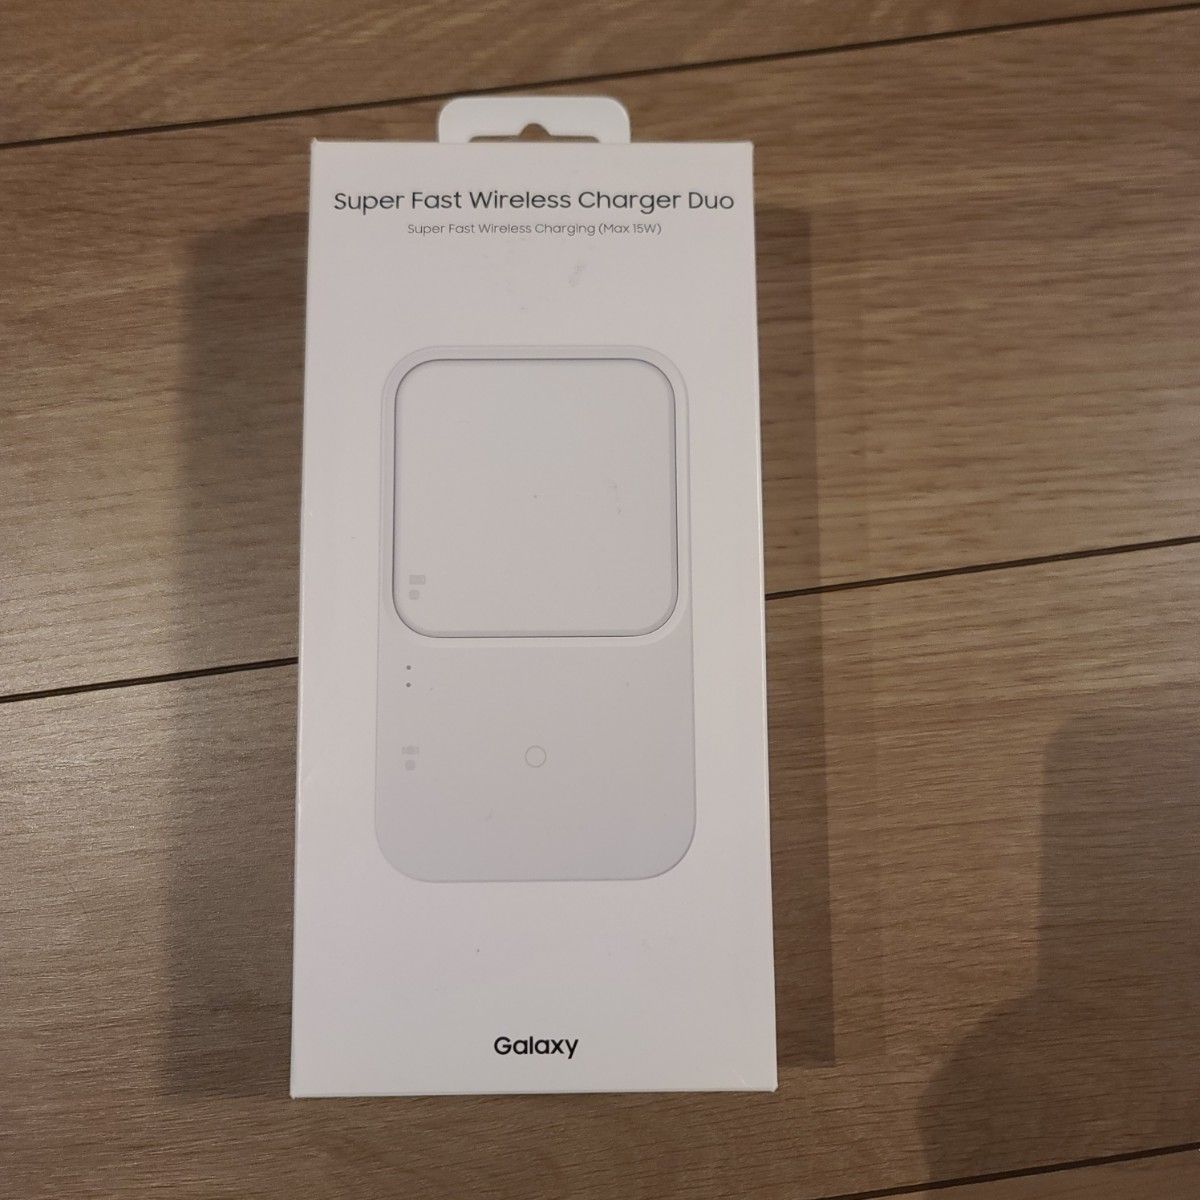 SAMSUNG Super fast wireless charger duo無線充電器